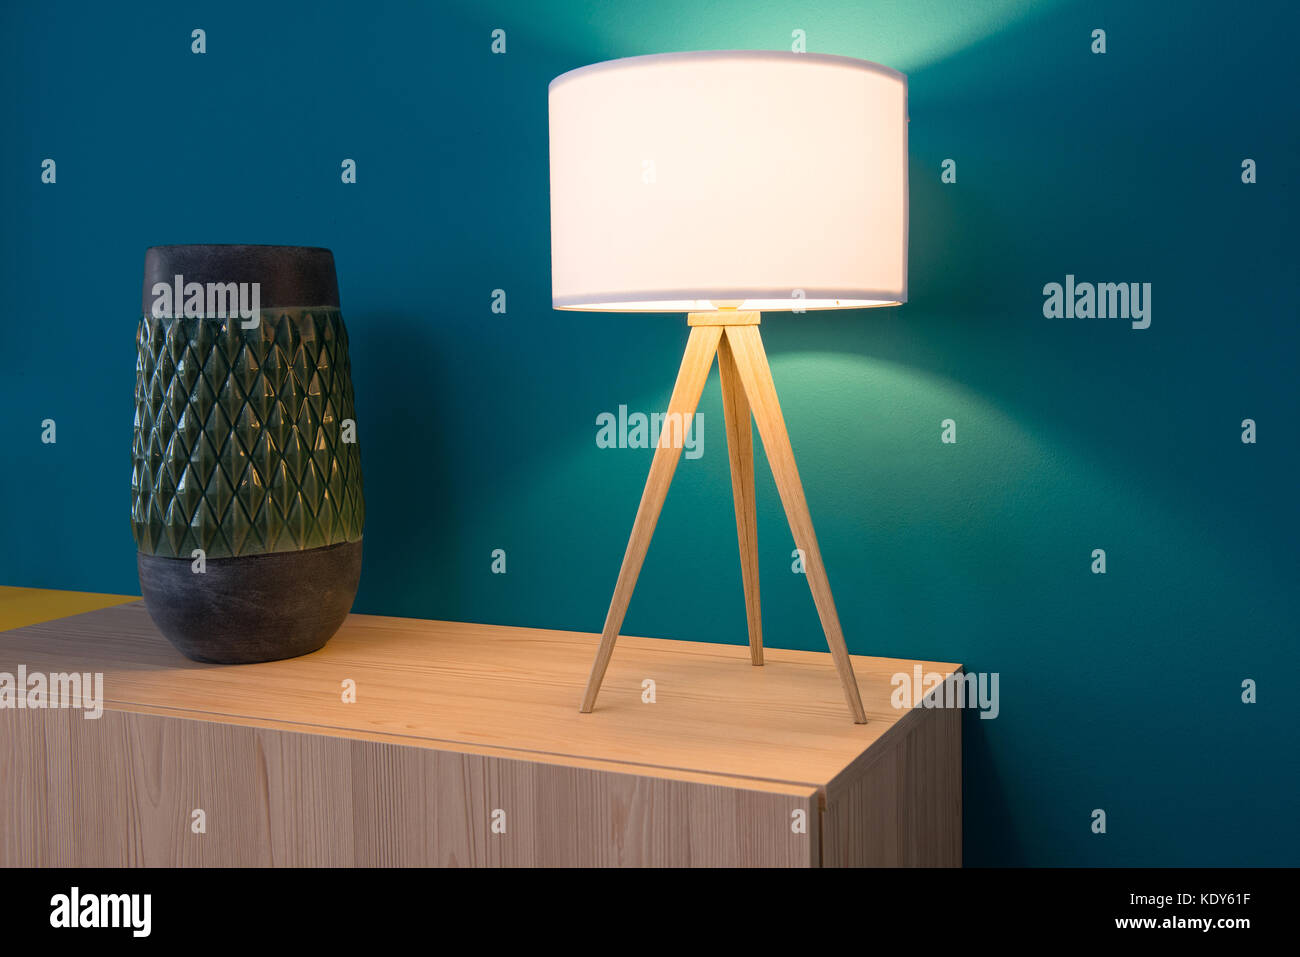 Lamp and vase on cabinet, blue wall in background Stock Photo